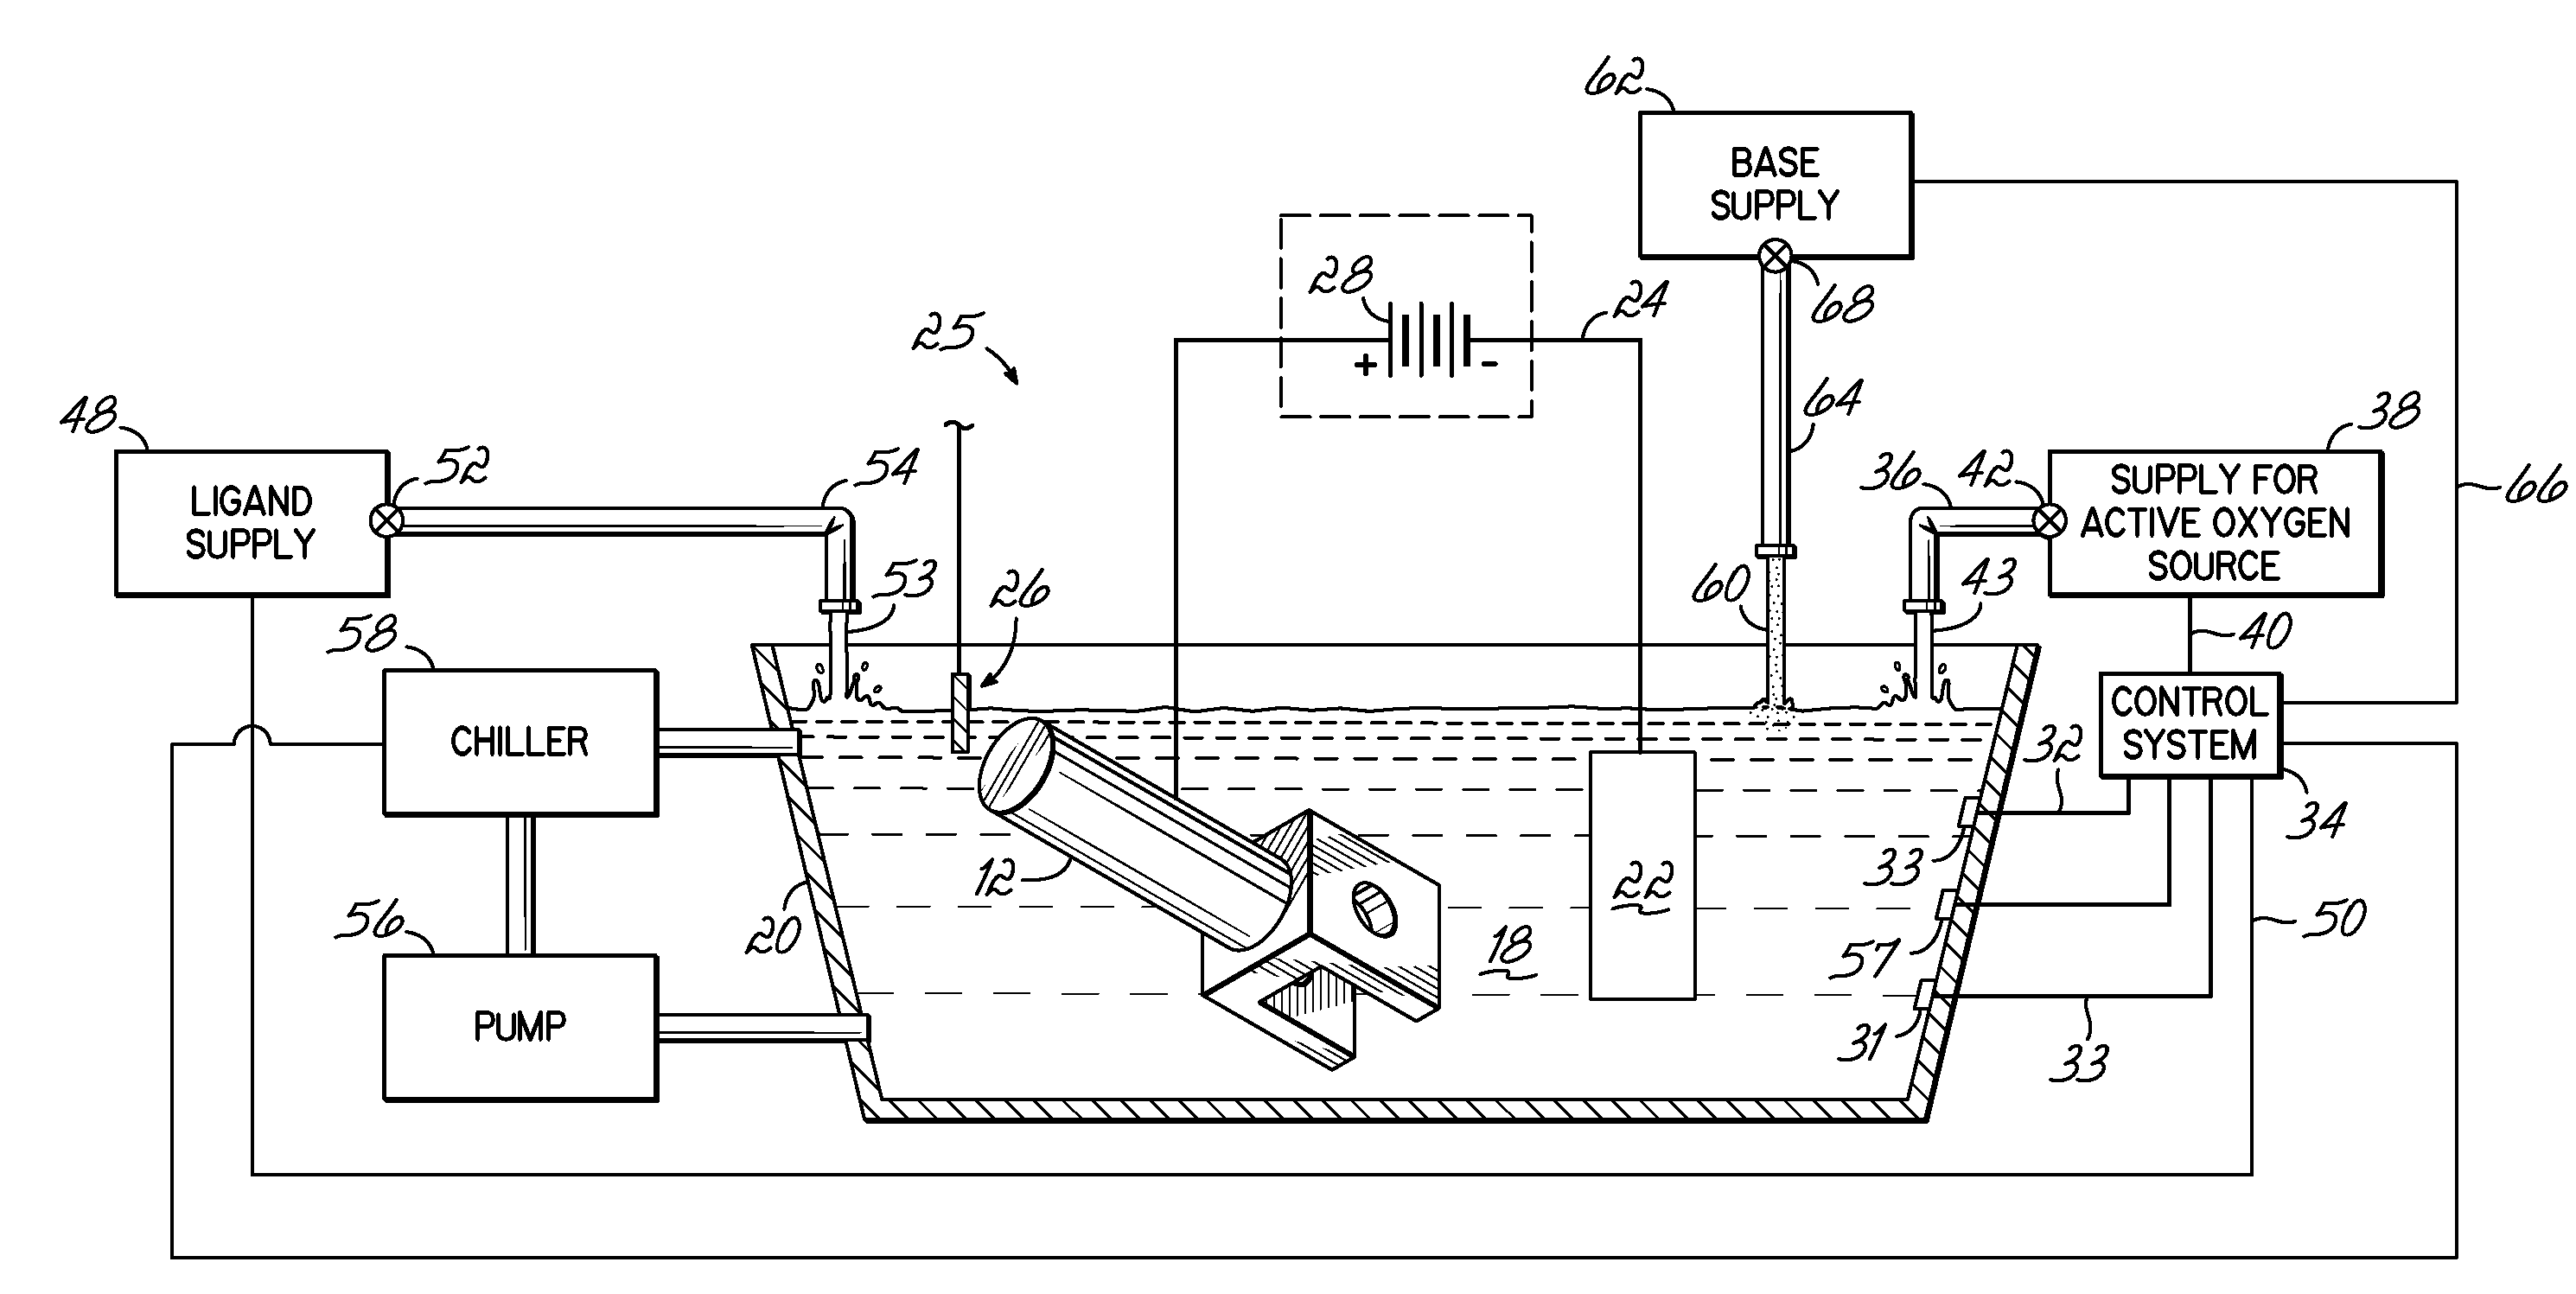 Apparatus, methods, and compositions for removing coatings from a metal component